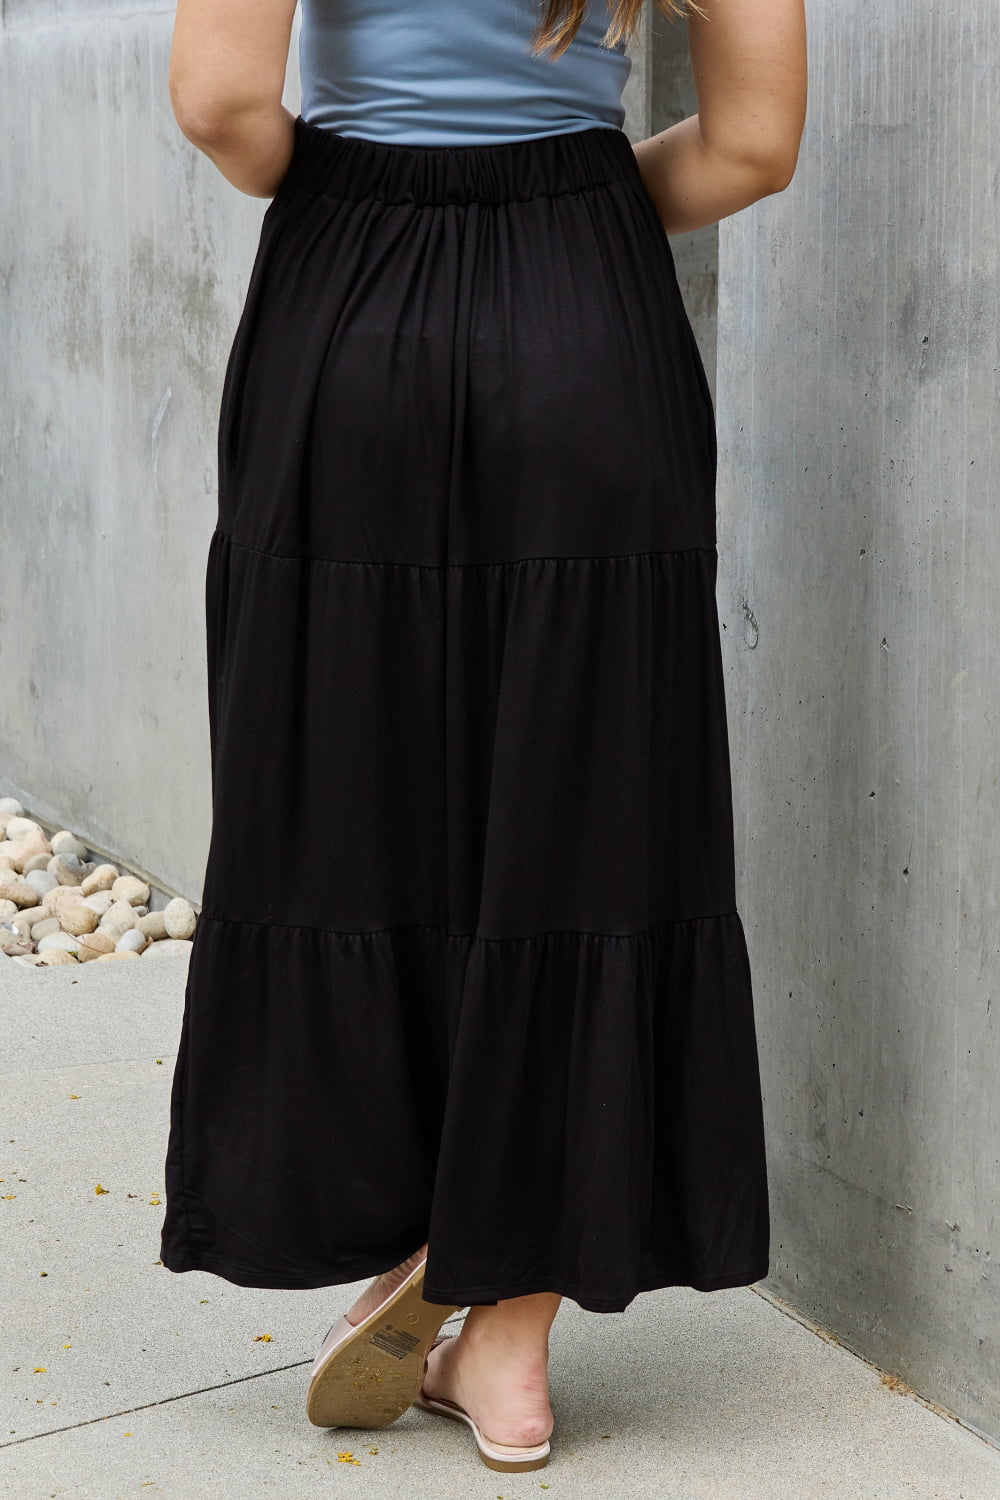 Back detail - sister missionary modest maxi skirt from Nauvoo Supply Co